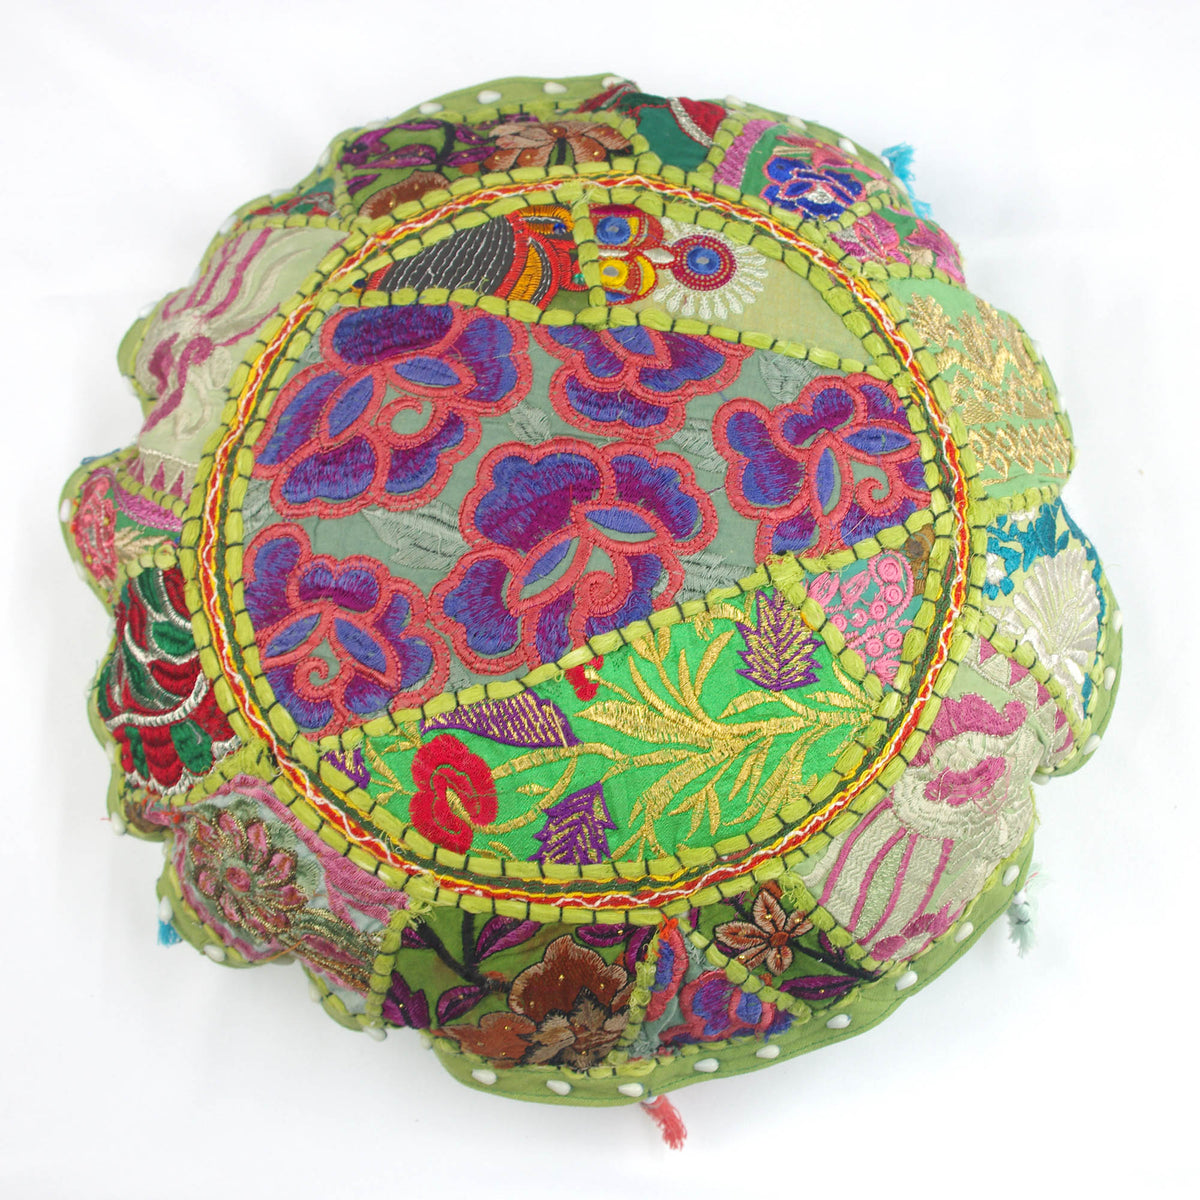 Green Round Floor Embroidered Patchwork Pouf Ottoman Indian Vintage Cushion Cover 18"